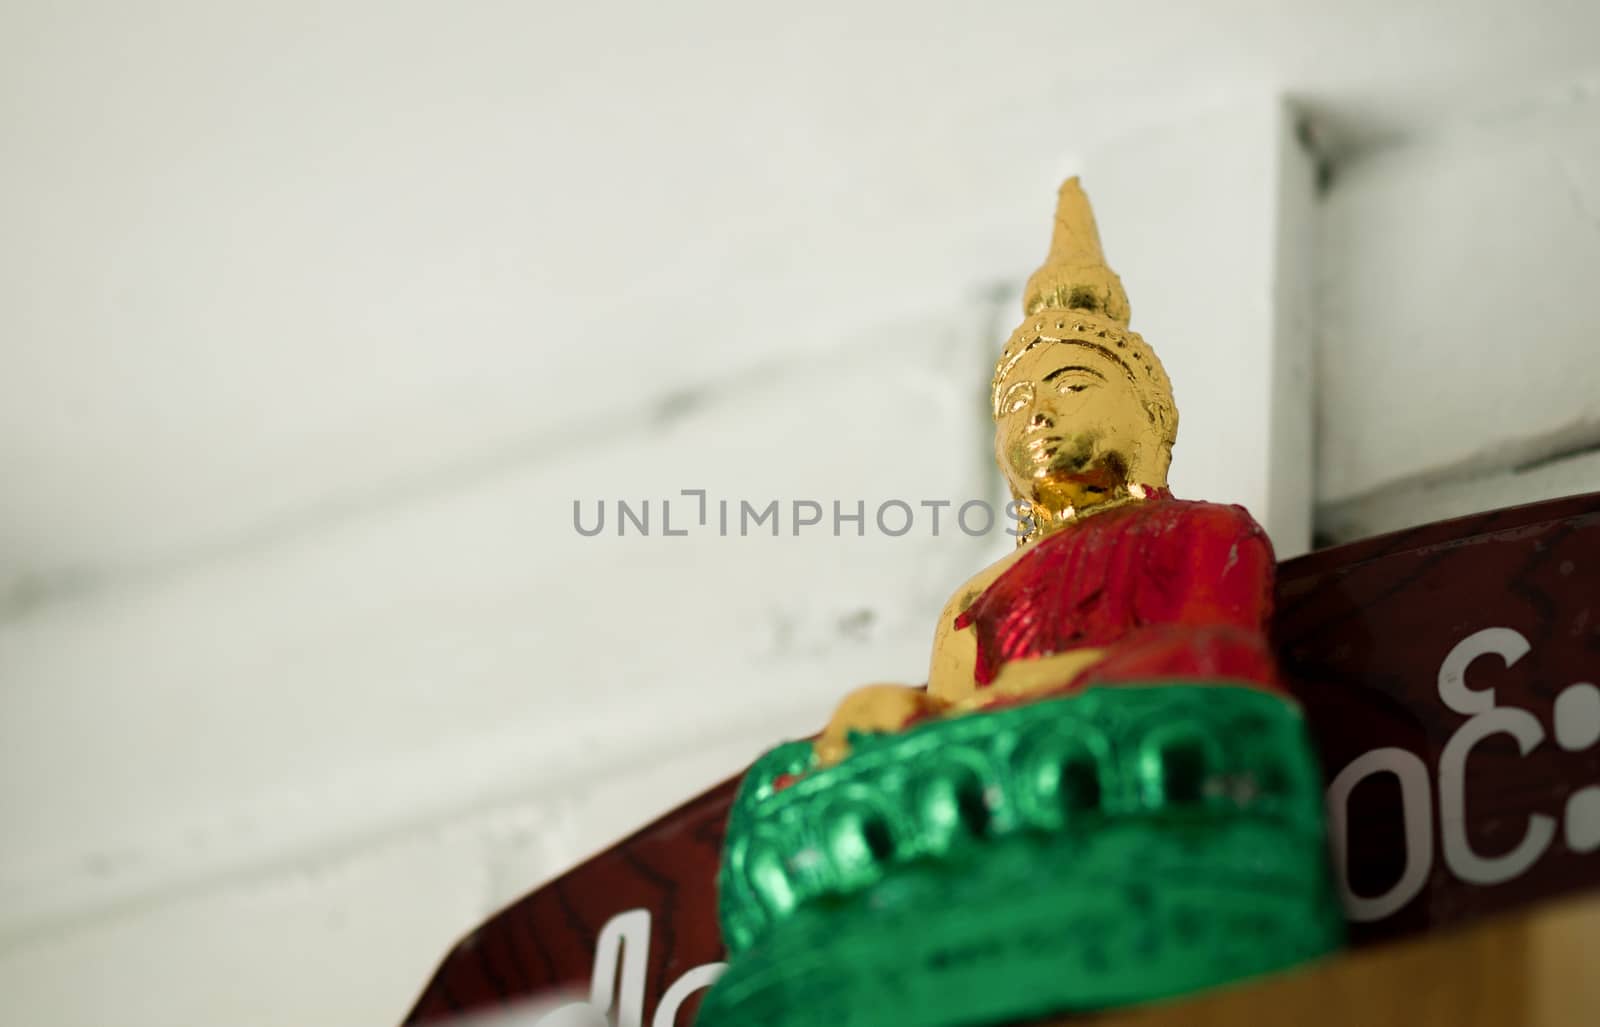 COLOR PHOTO OF BUDDHA STATUE FOCUS ON FACE